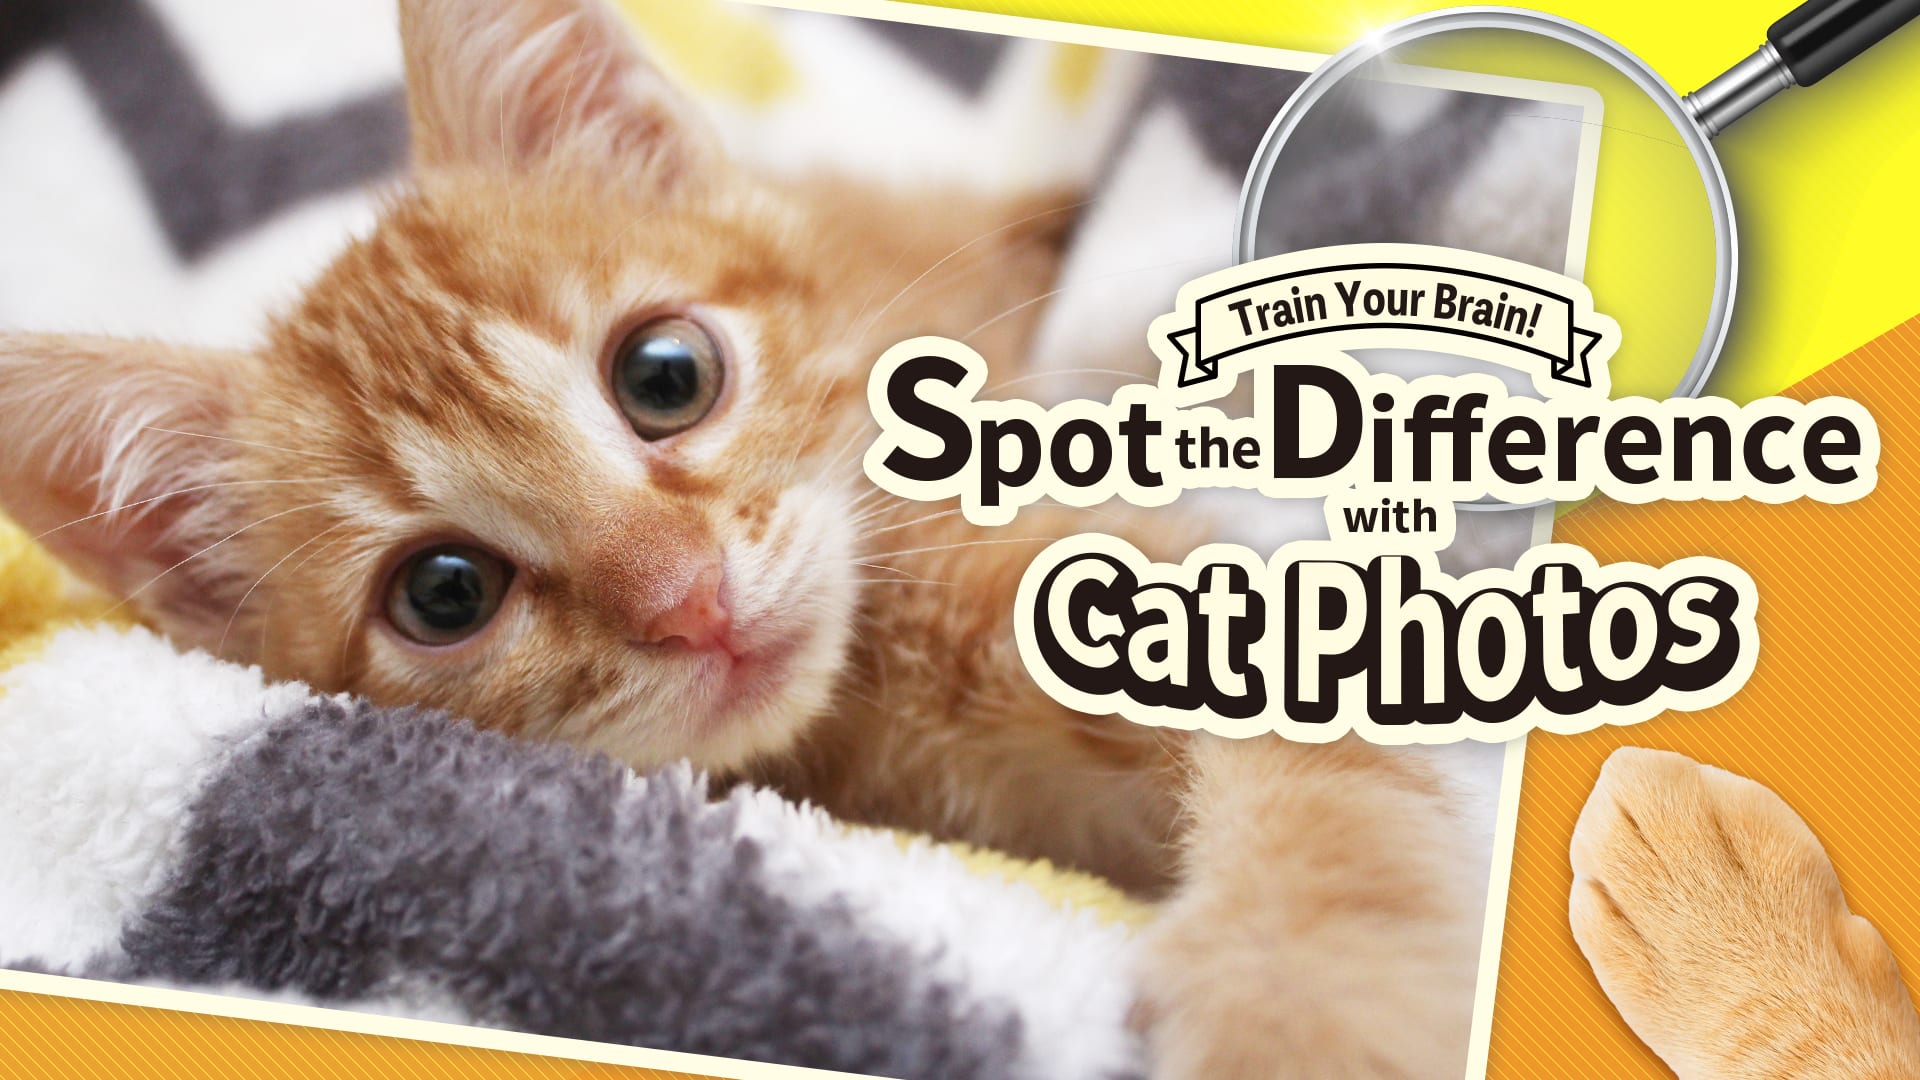 Train Your Brain! Spot the Difference with Cat Photos